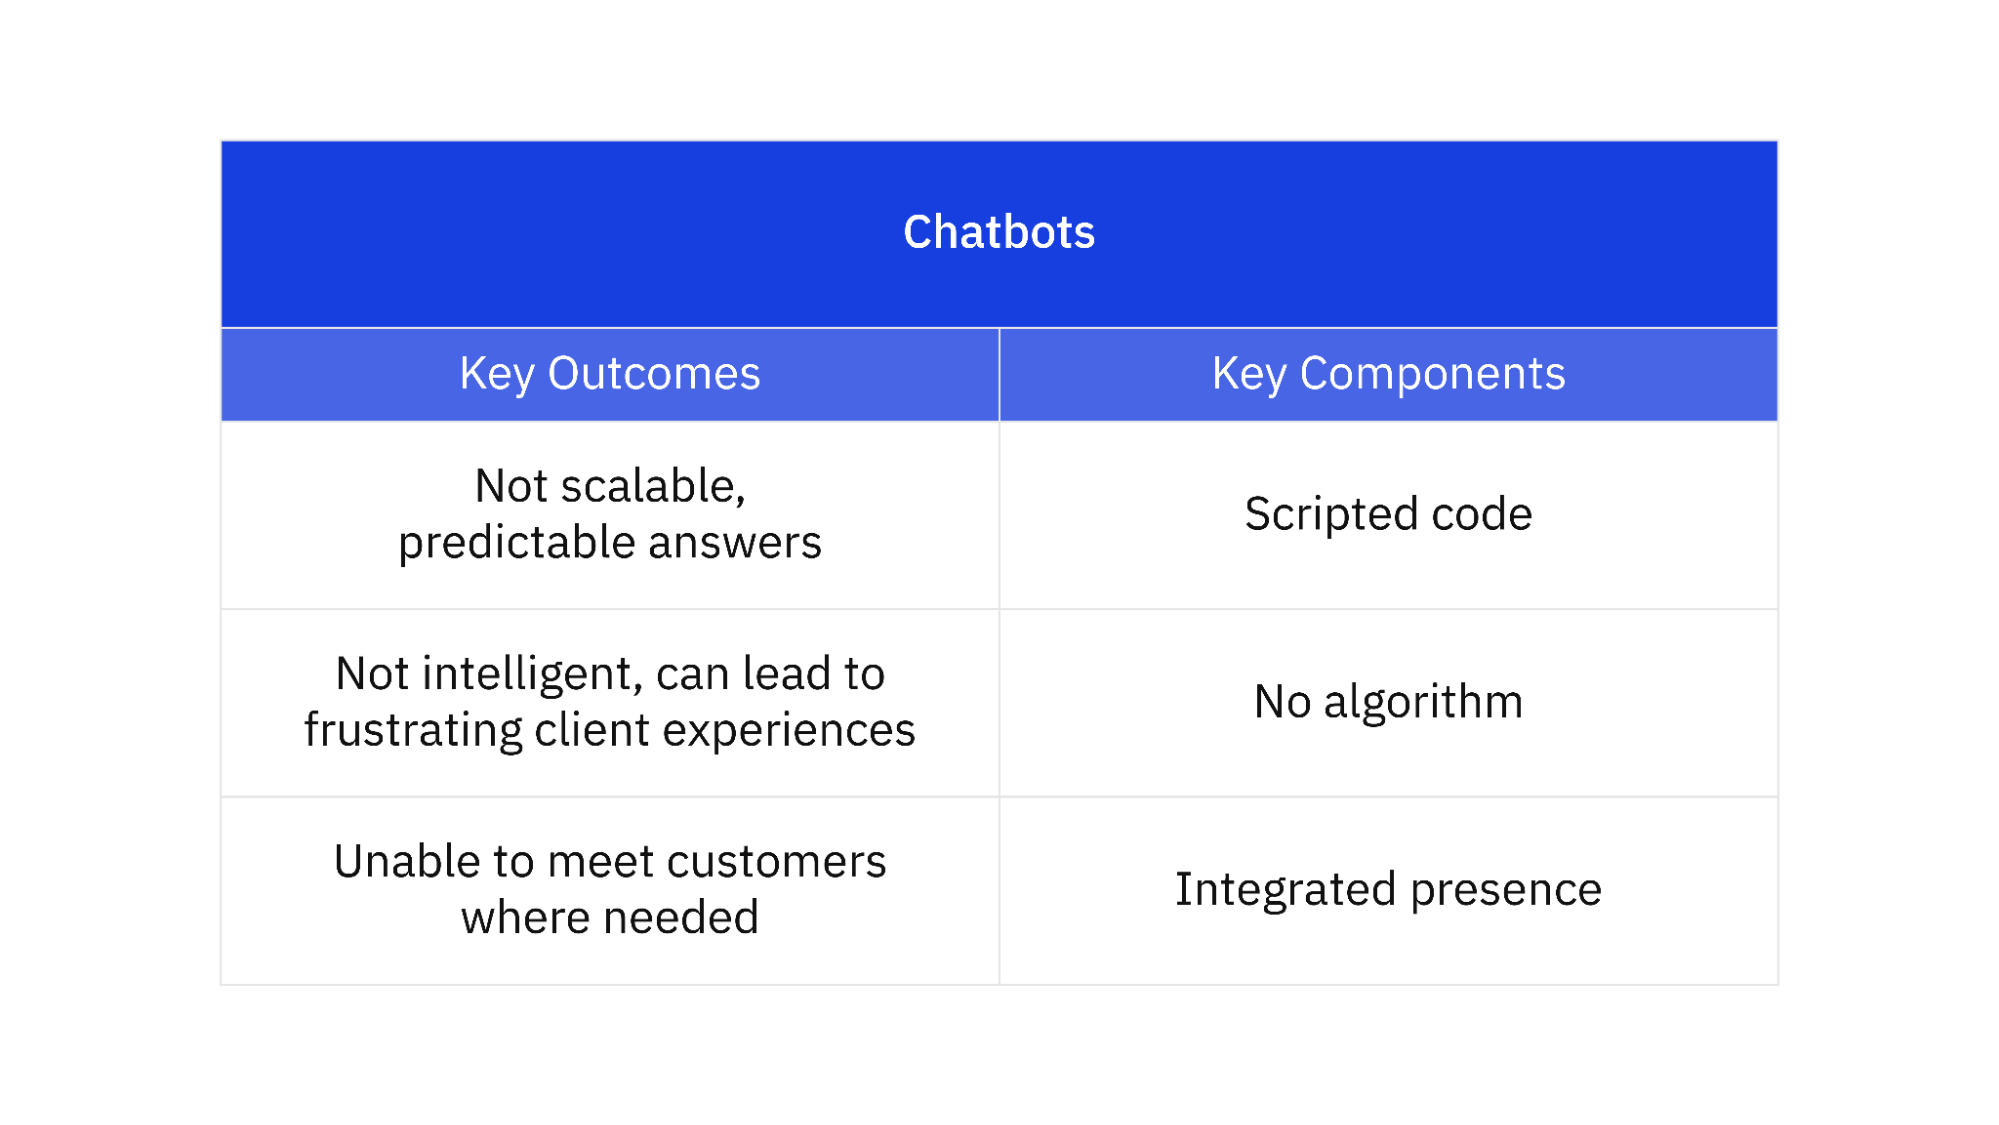 Chatbots - key outcomes and components